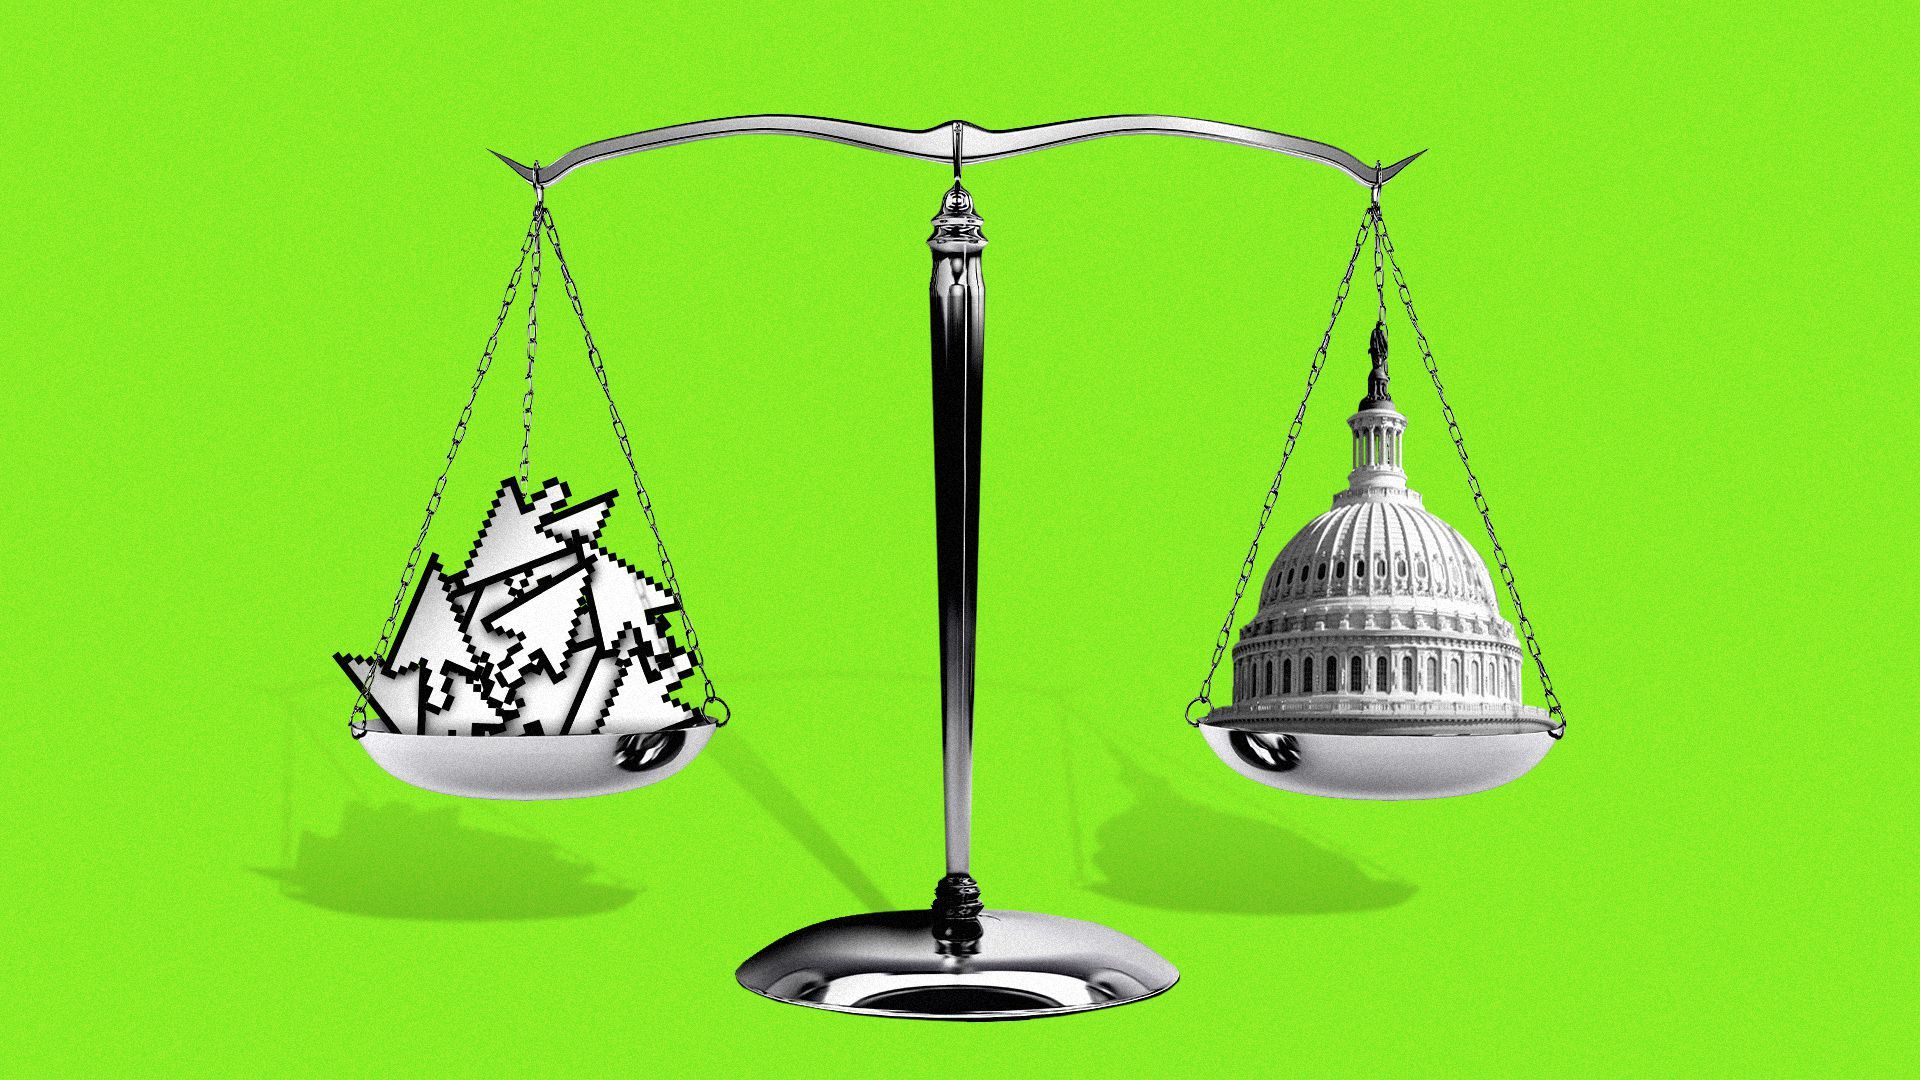 Illustration of the scales of justice with one side full of a pile of cursors and one side with the Capitol Dome. 